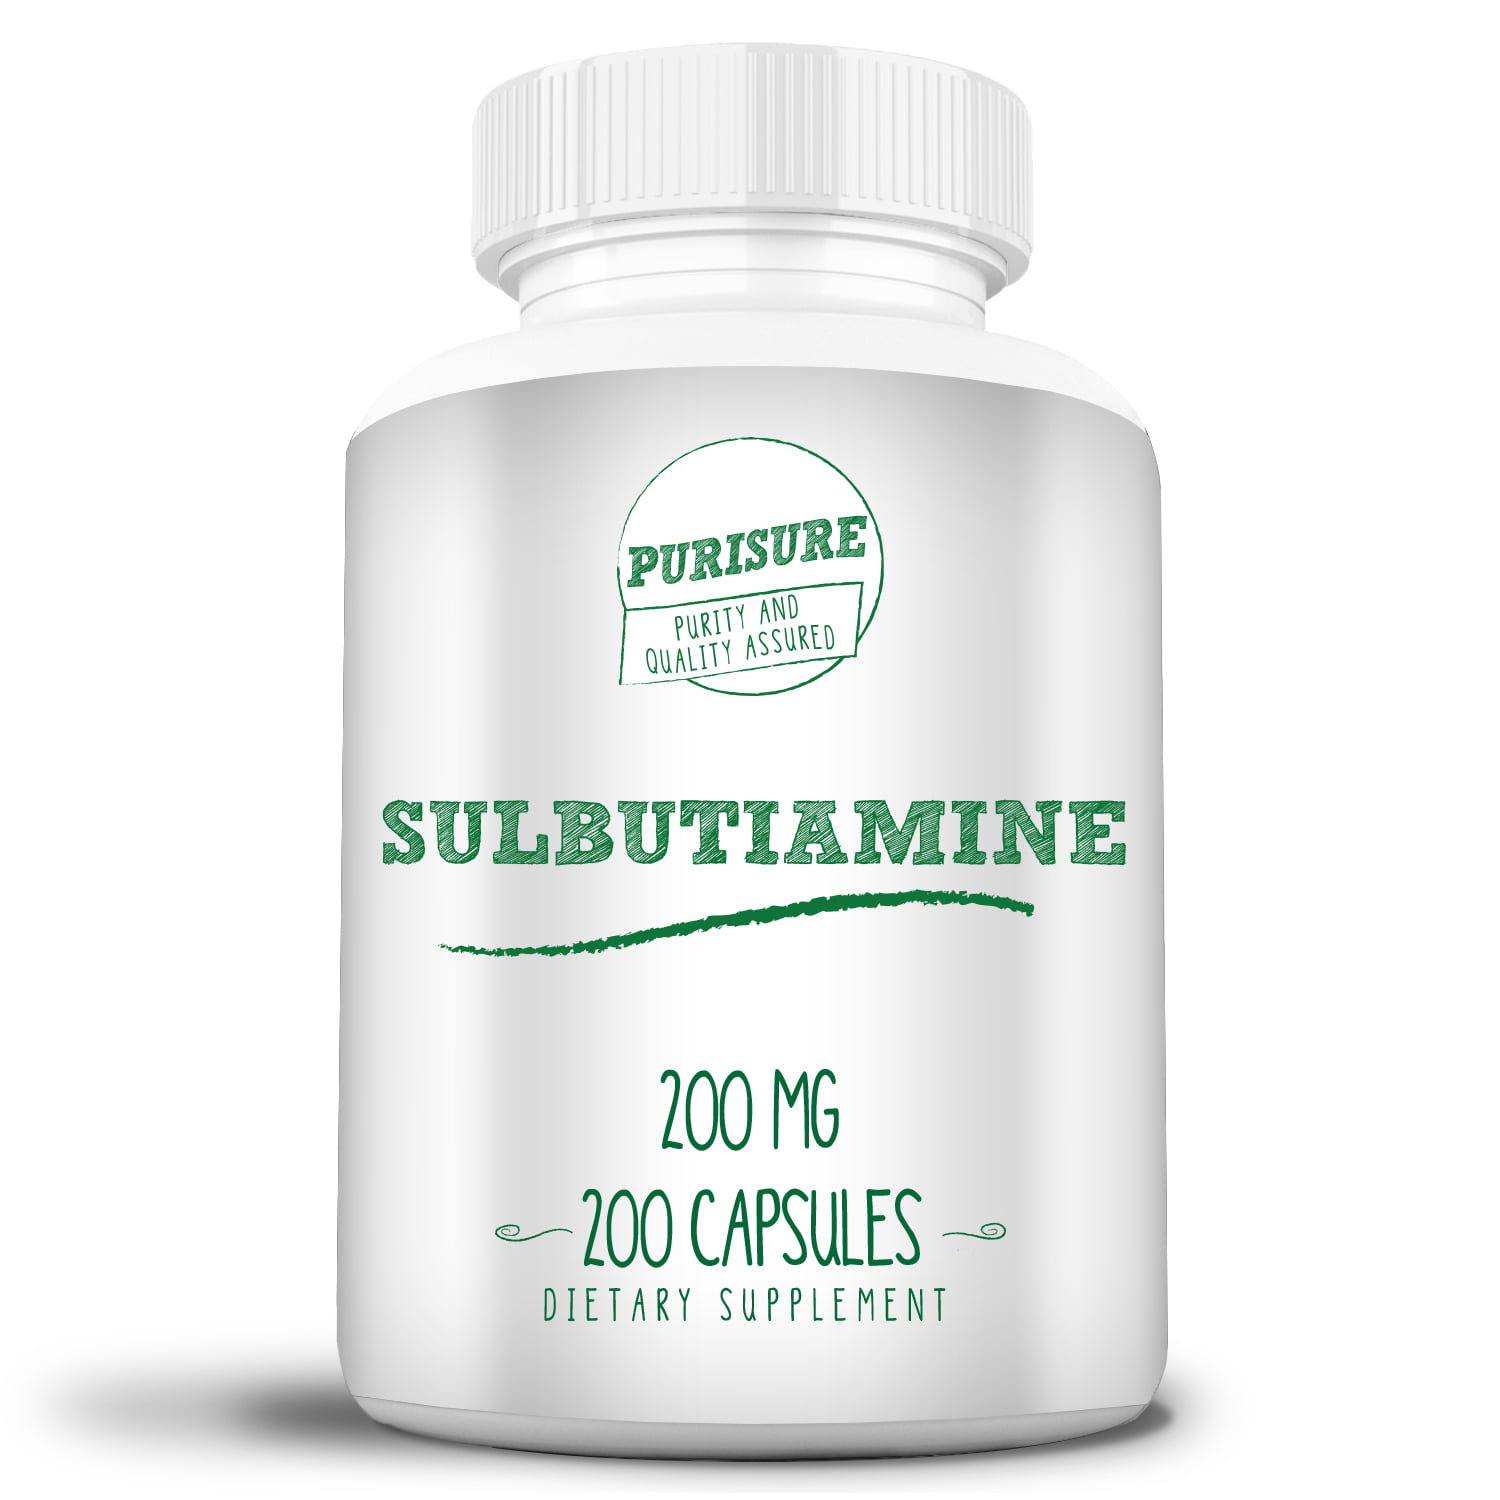 Best Sulbutiamine pre workout for Routine Workout